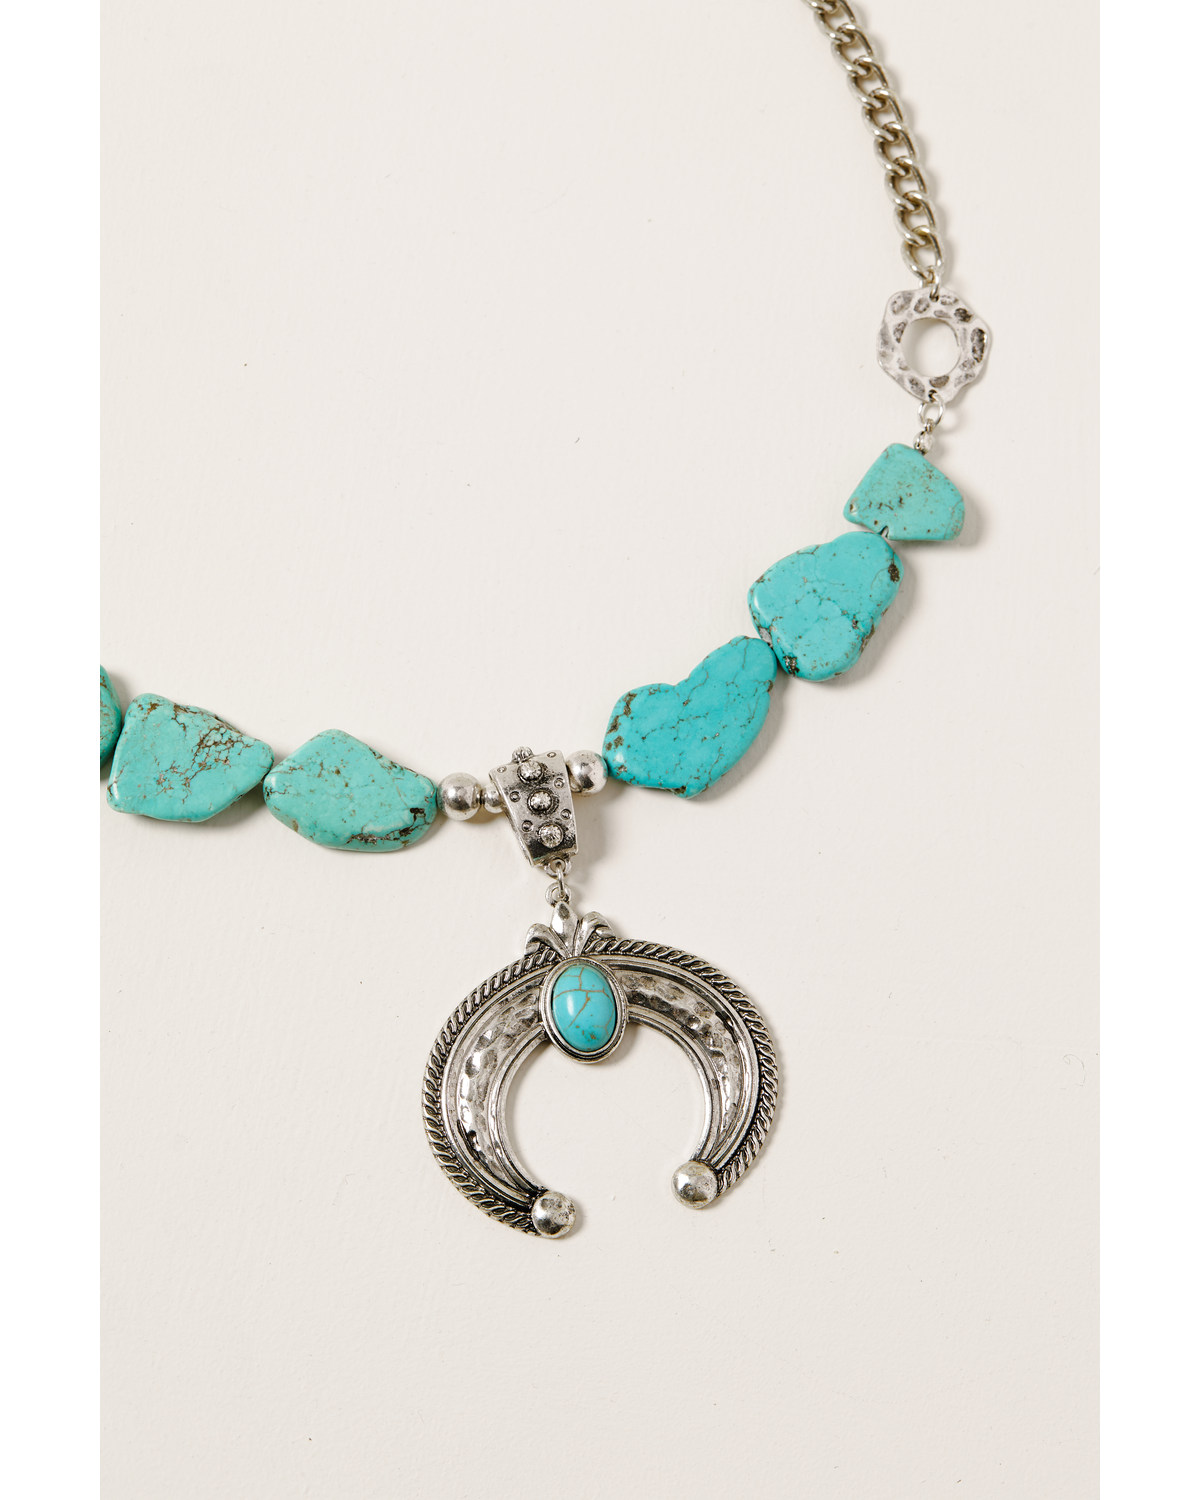 Shyanne Women's Midnight Sky Squash Blossom Turquoise Stone Necklace